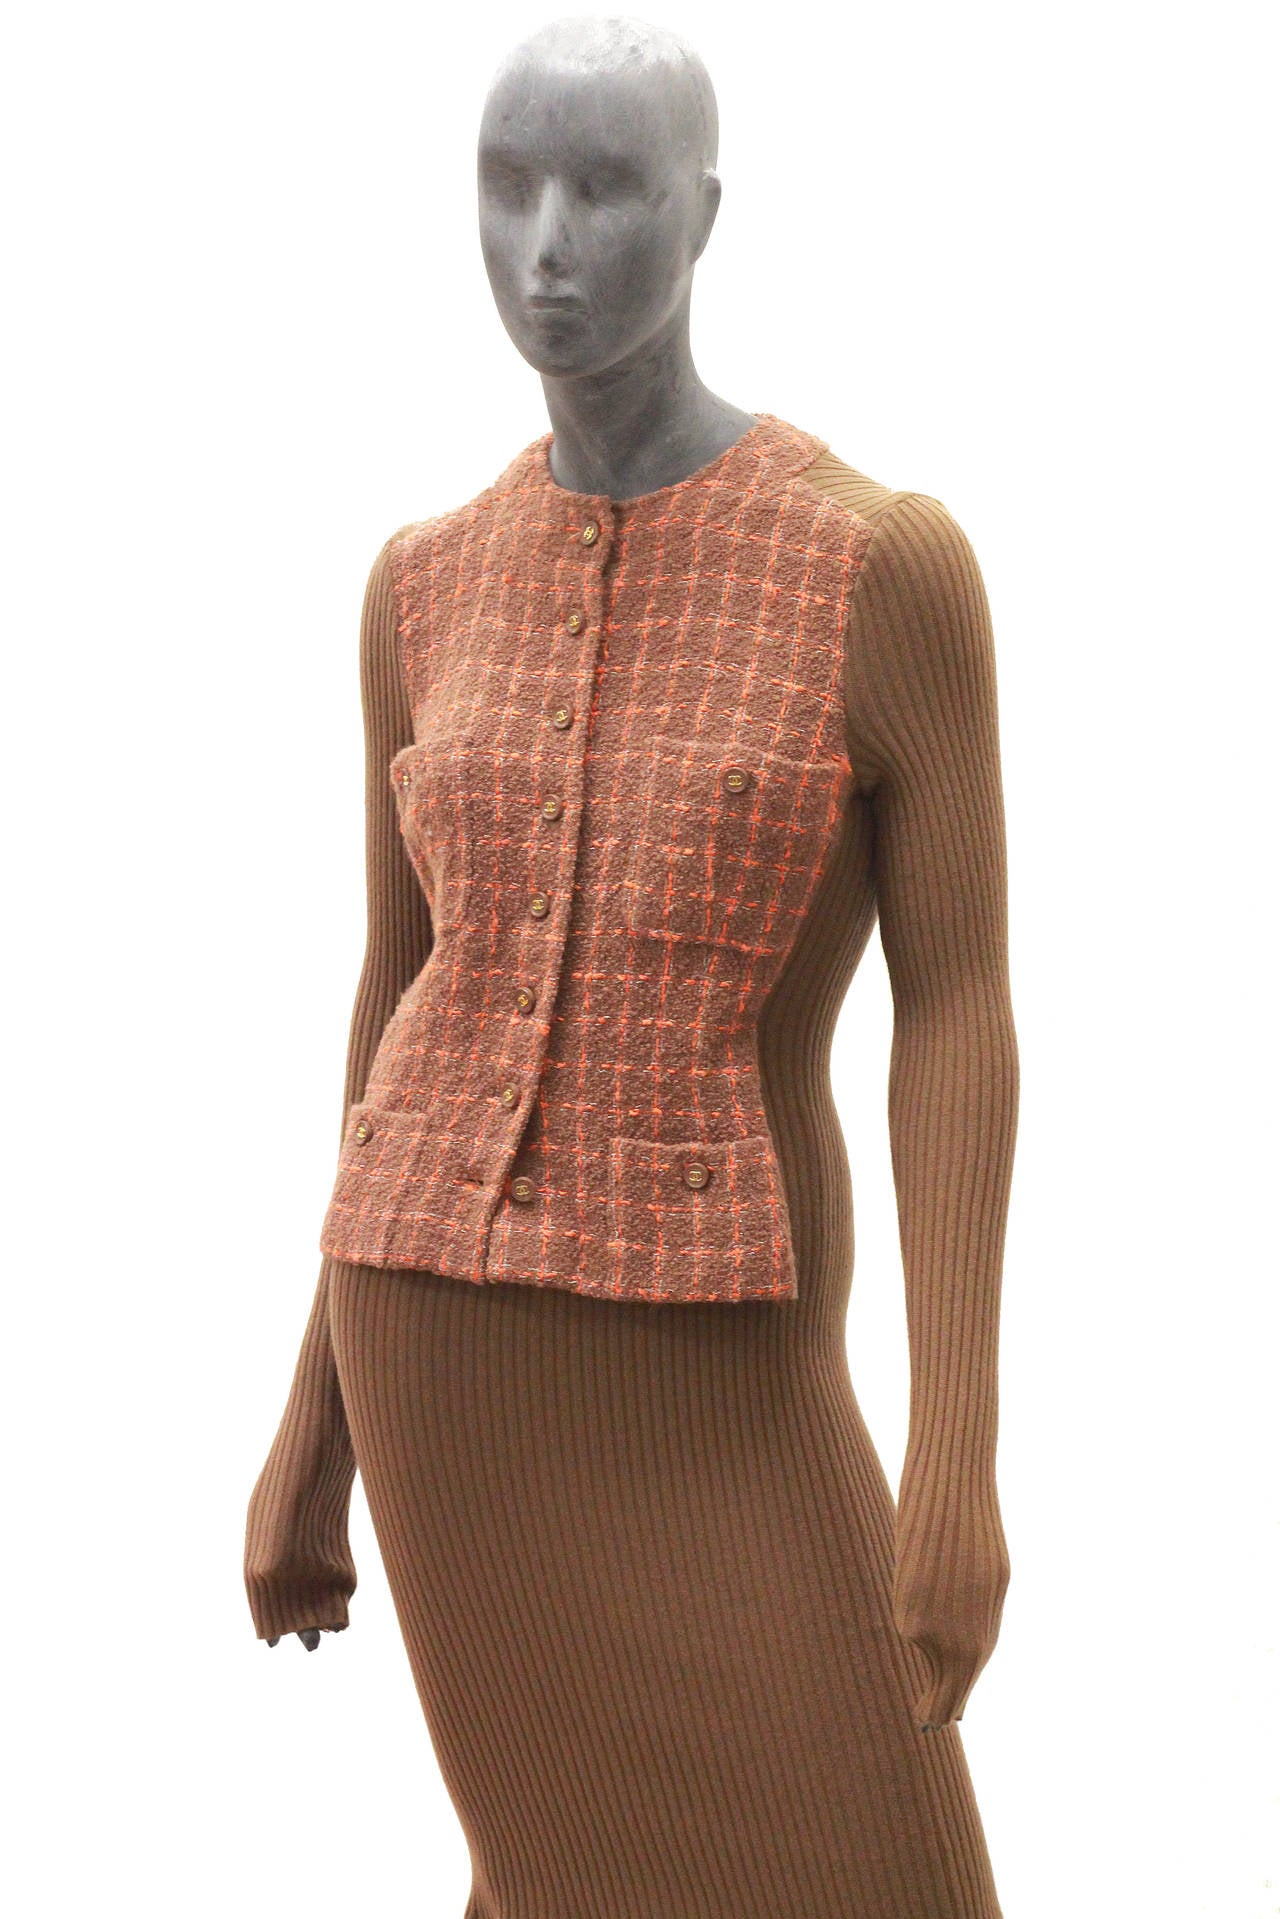 Brown Chanel rib knit body con dress with attached jacket c. 1995